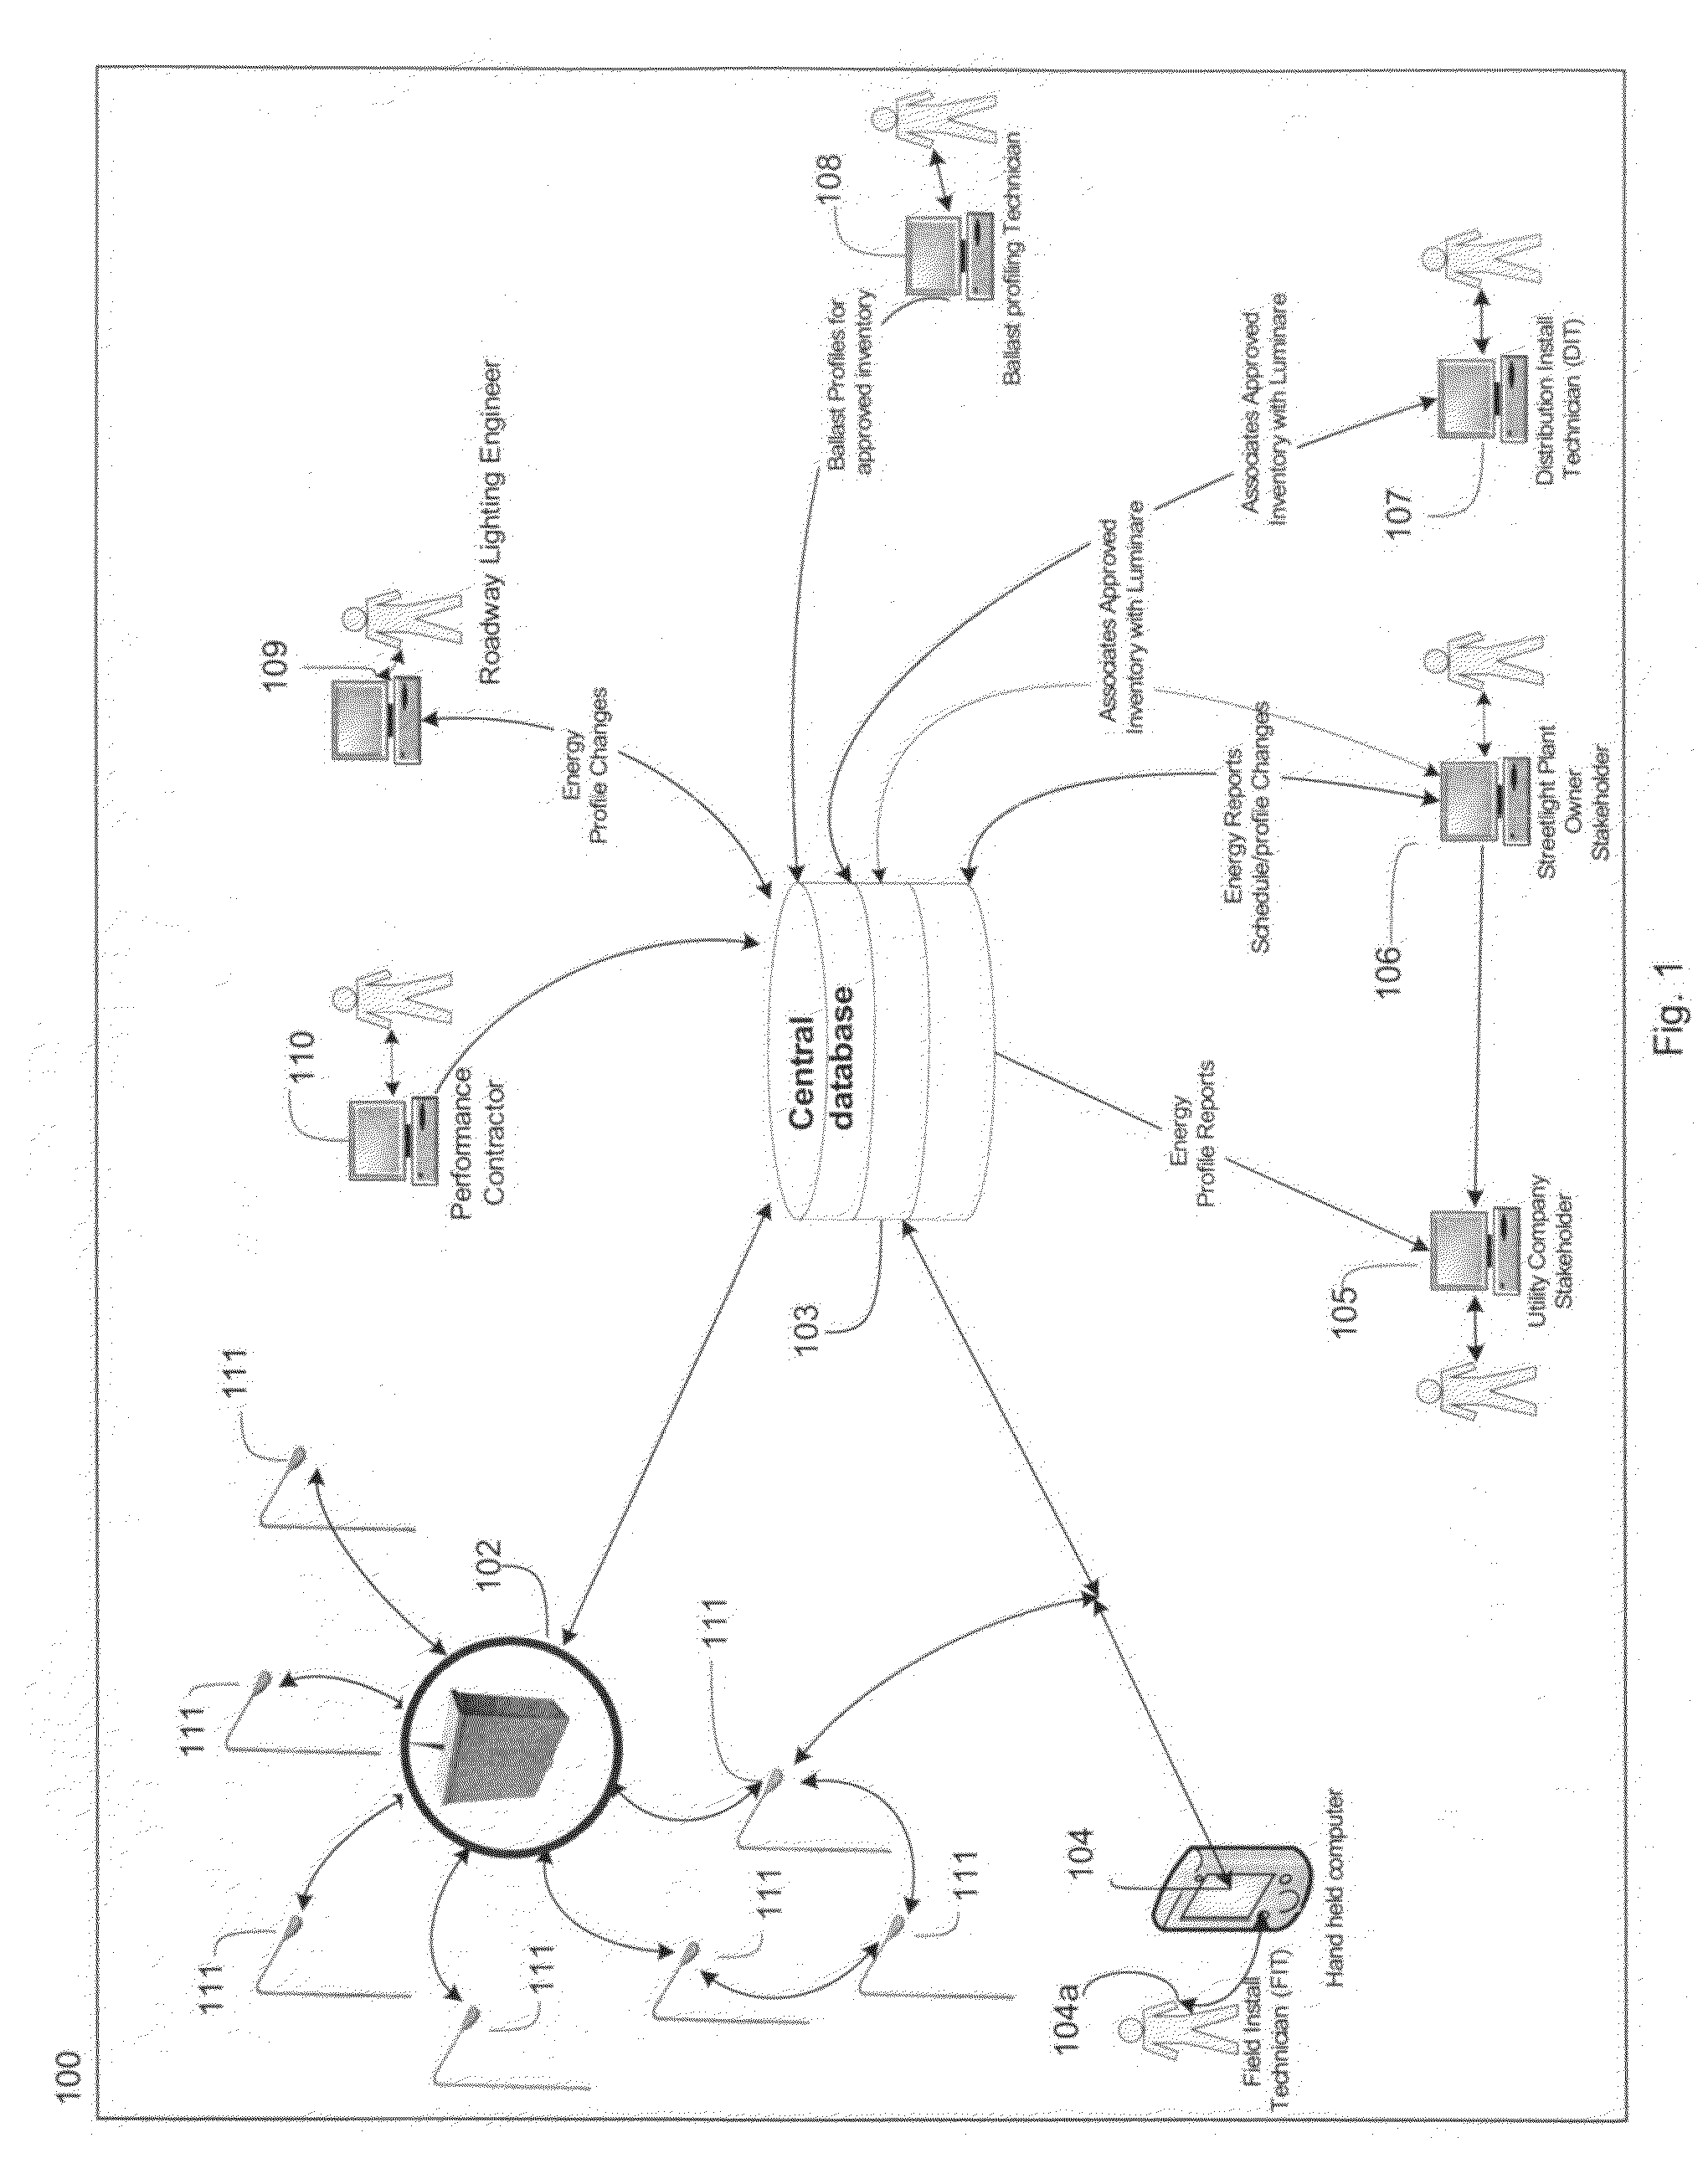 Centralized route calculation for a multi-hop streetlight network